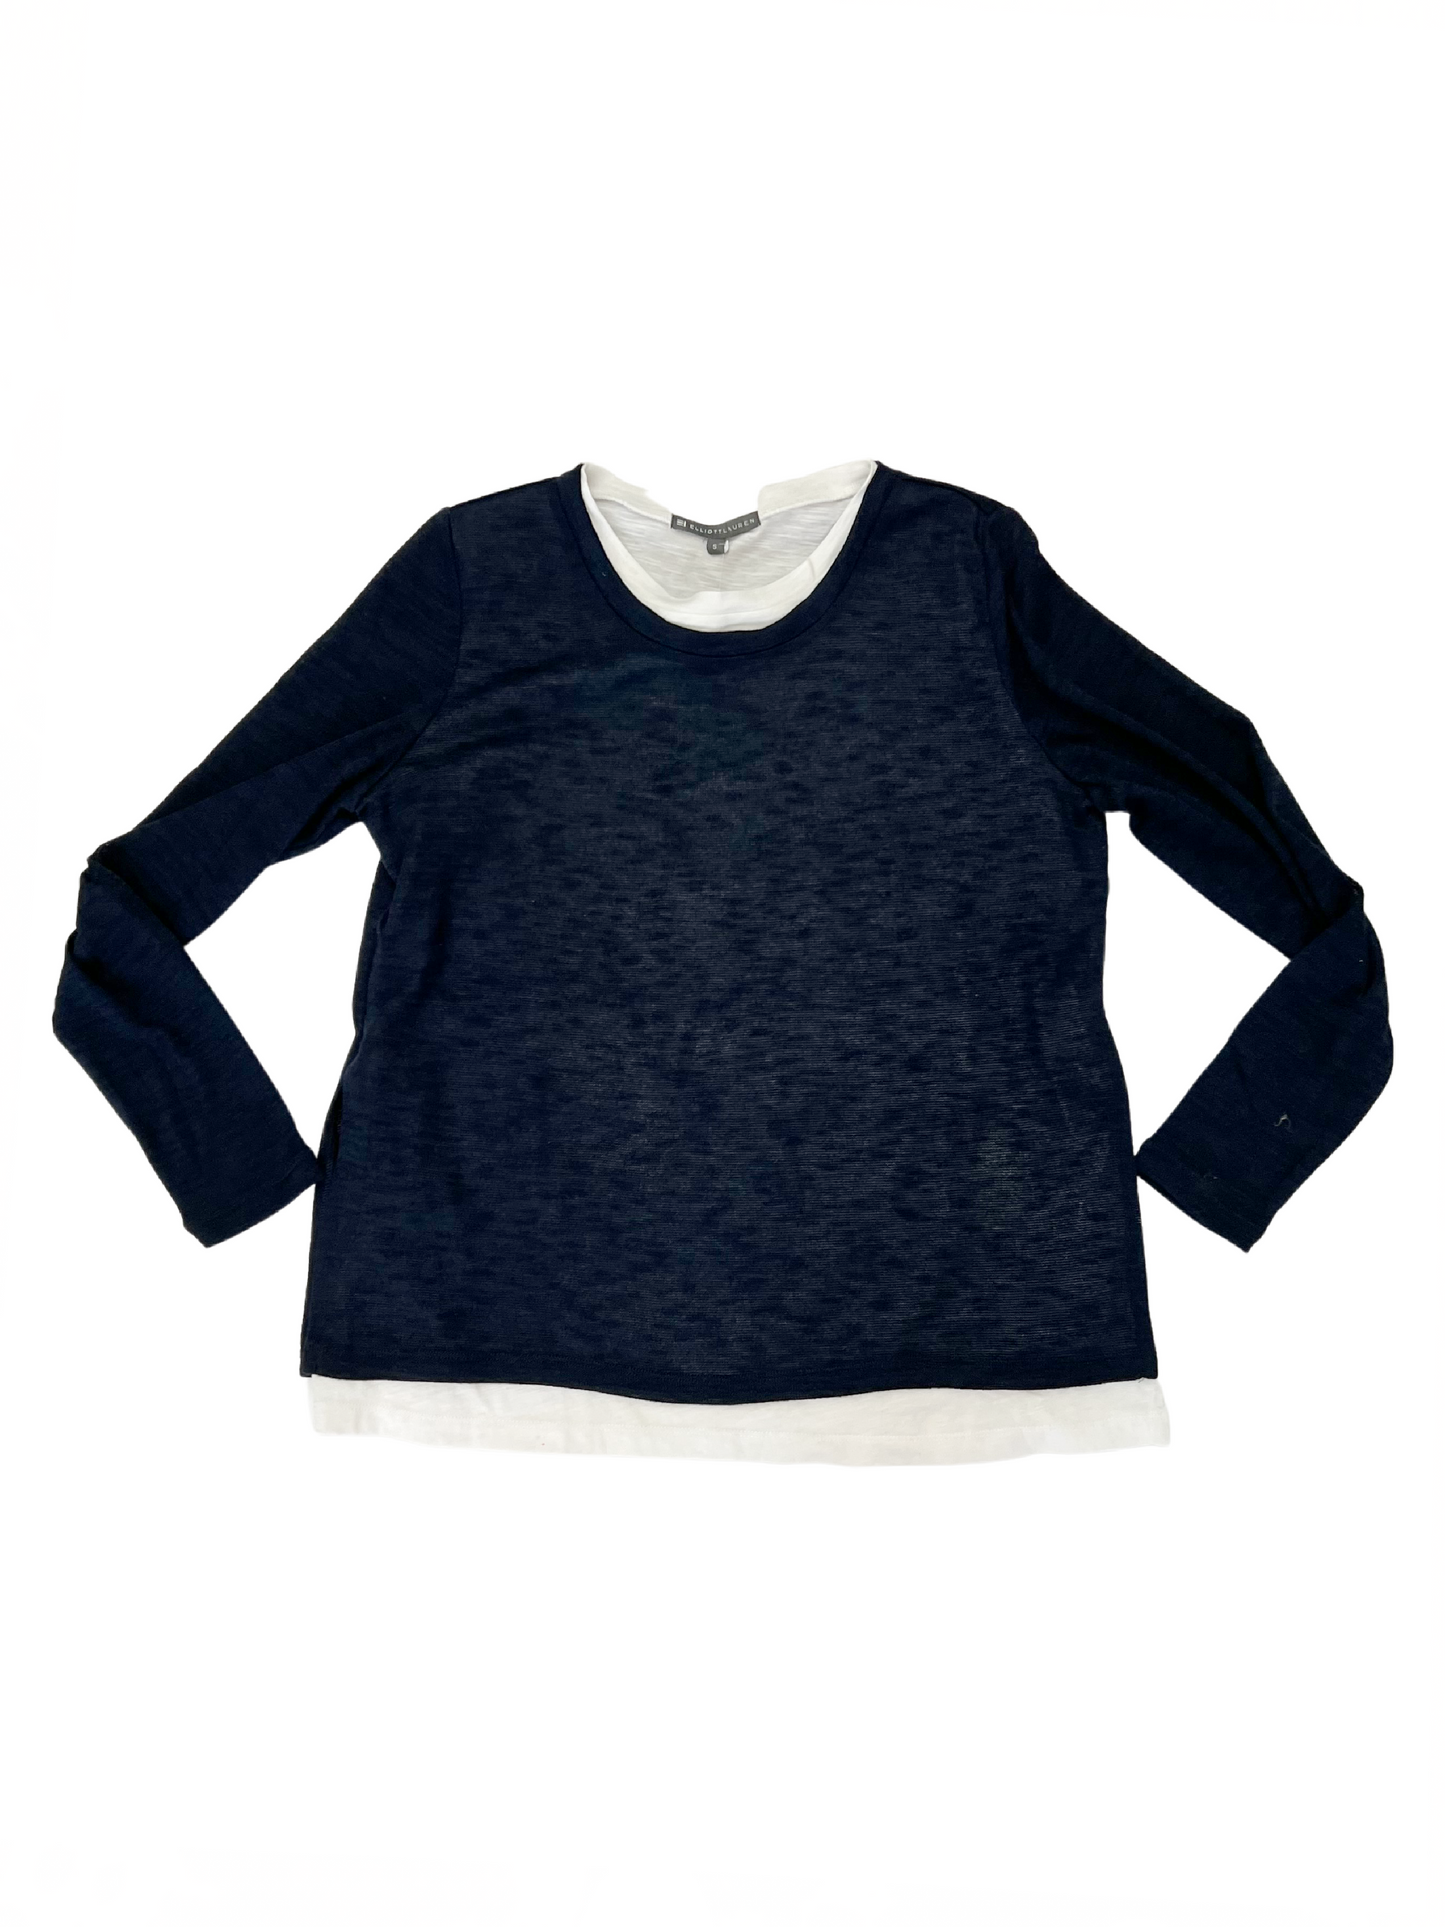 Double Layer Navy/White T-Shirt